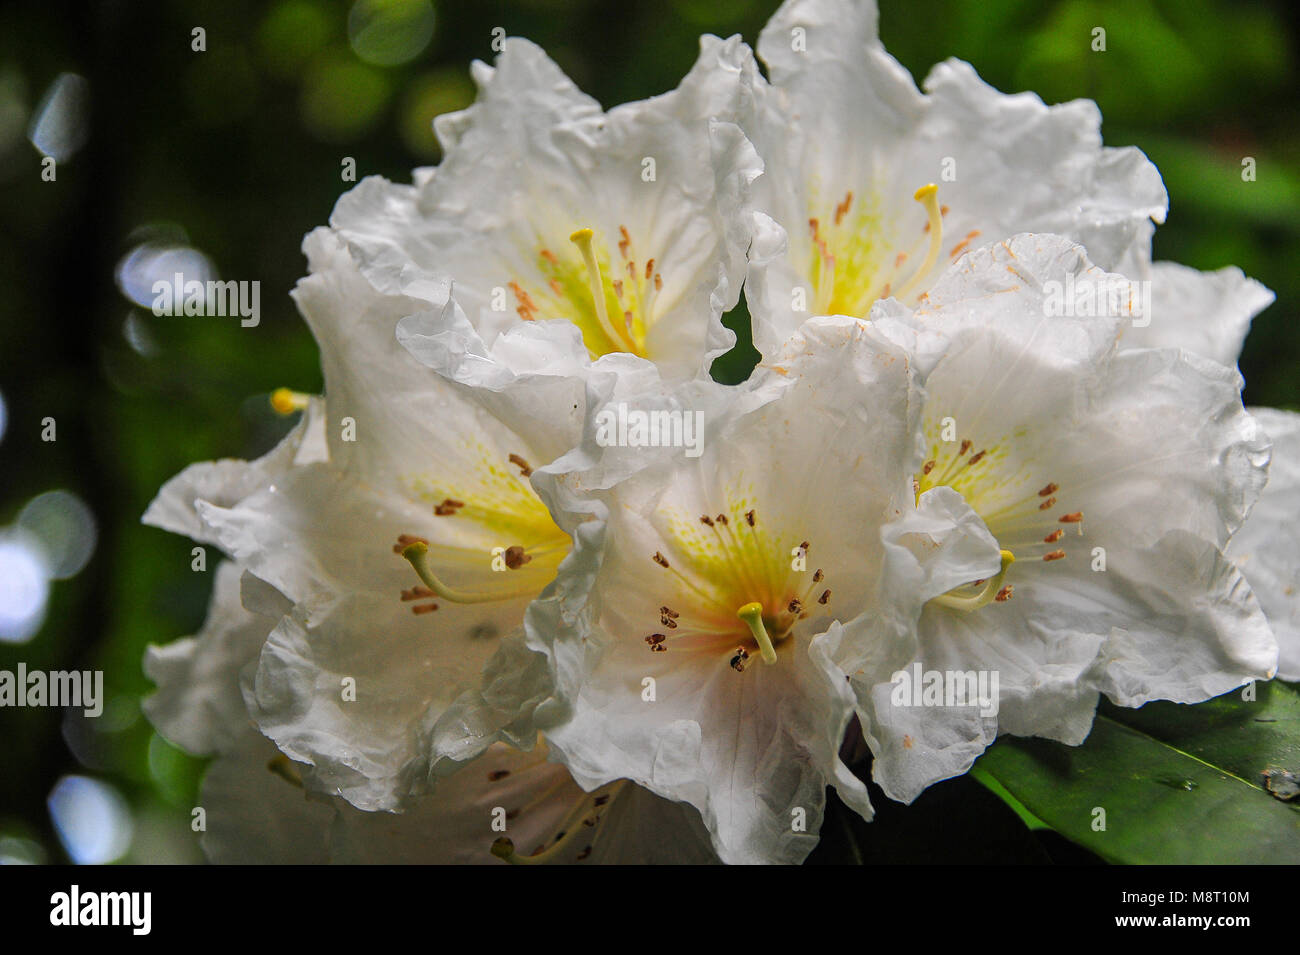 Close-up of Cunninghams White Rhododendron flower with yellow eye, orange stamens and pistil. Beautiful image, dark green leaves on a bokeh background Stock Photo